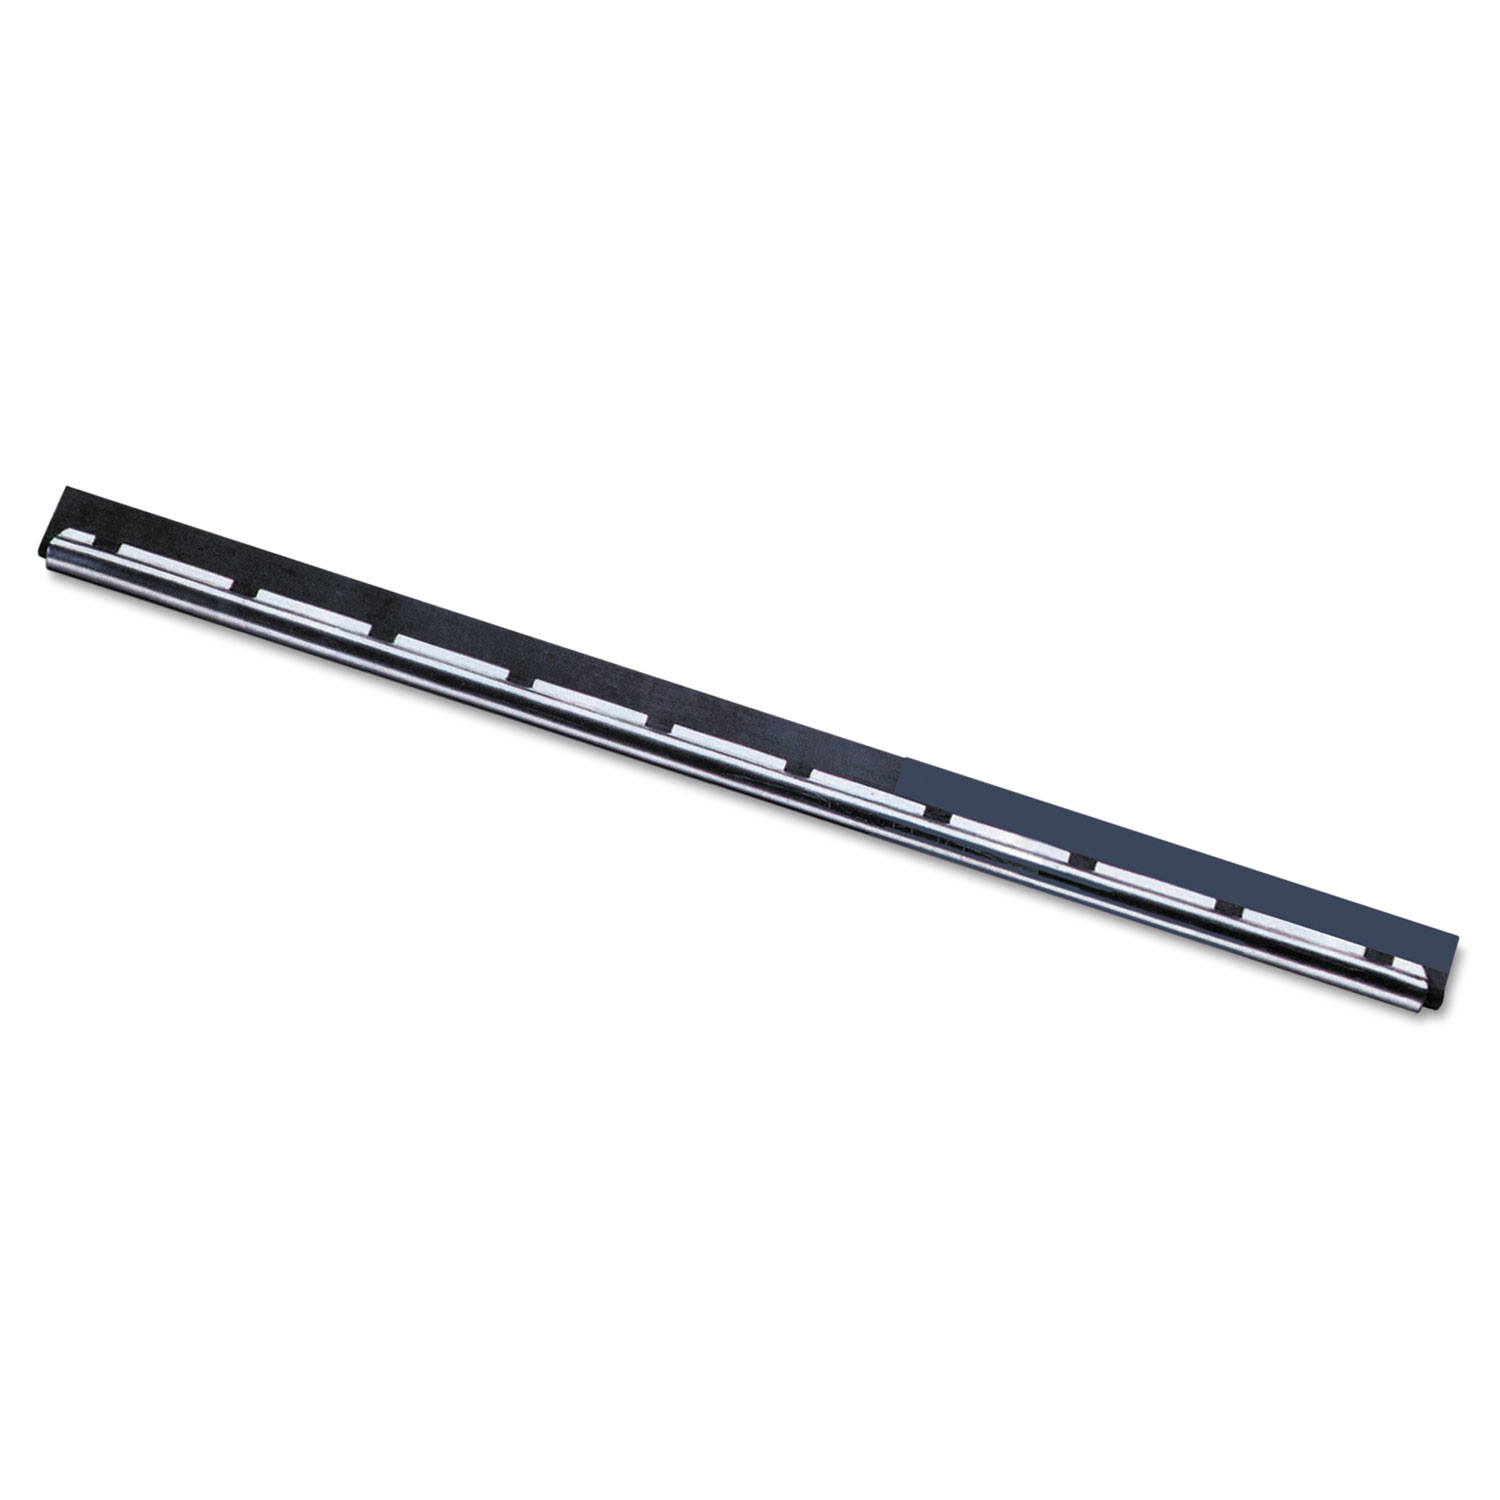  Unger NE350 Stainless Steel S Channel 14 with Soft Rubber (UNGNE35) 